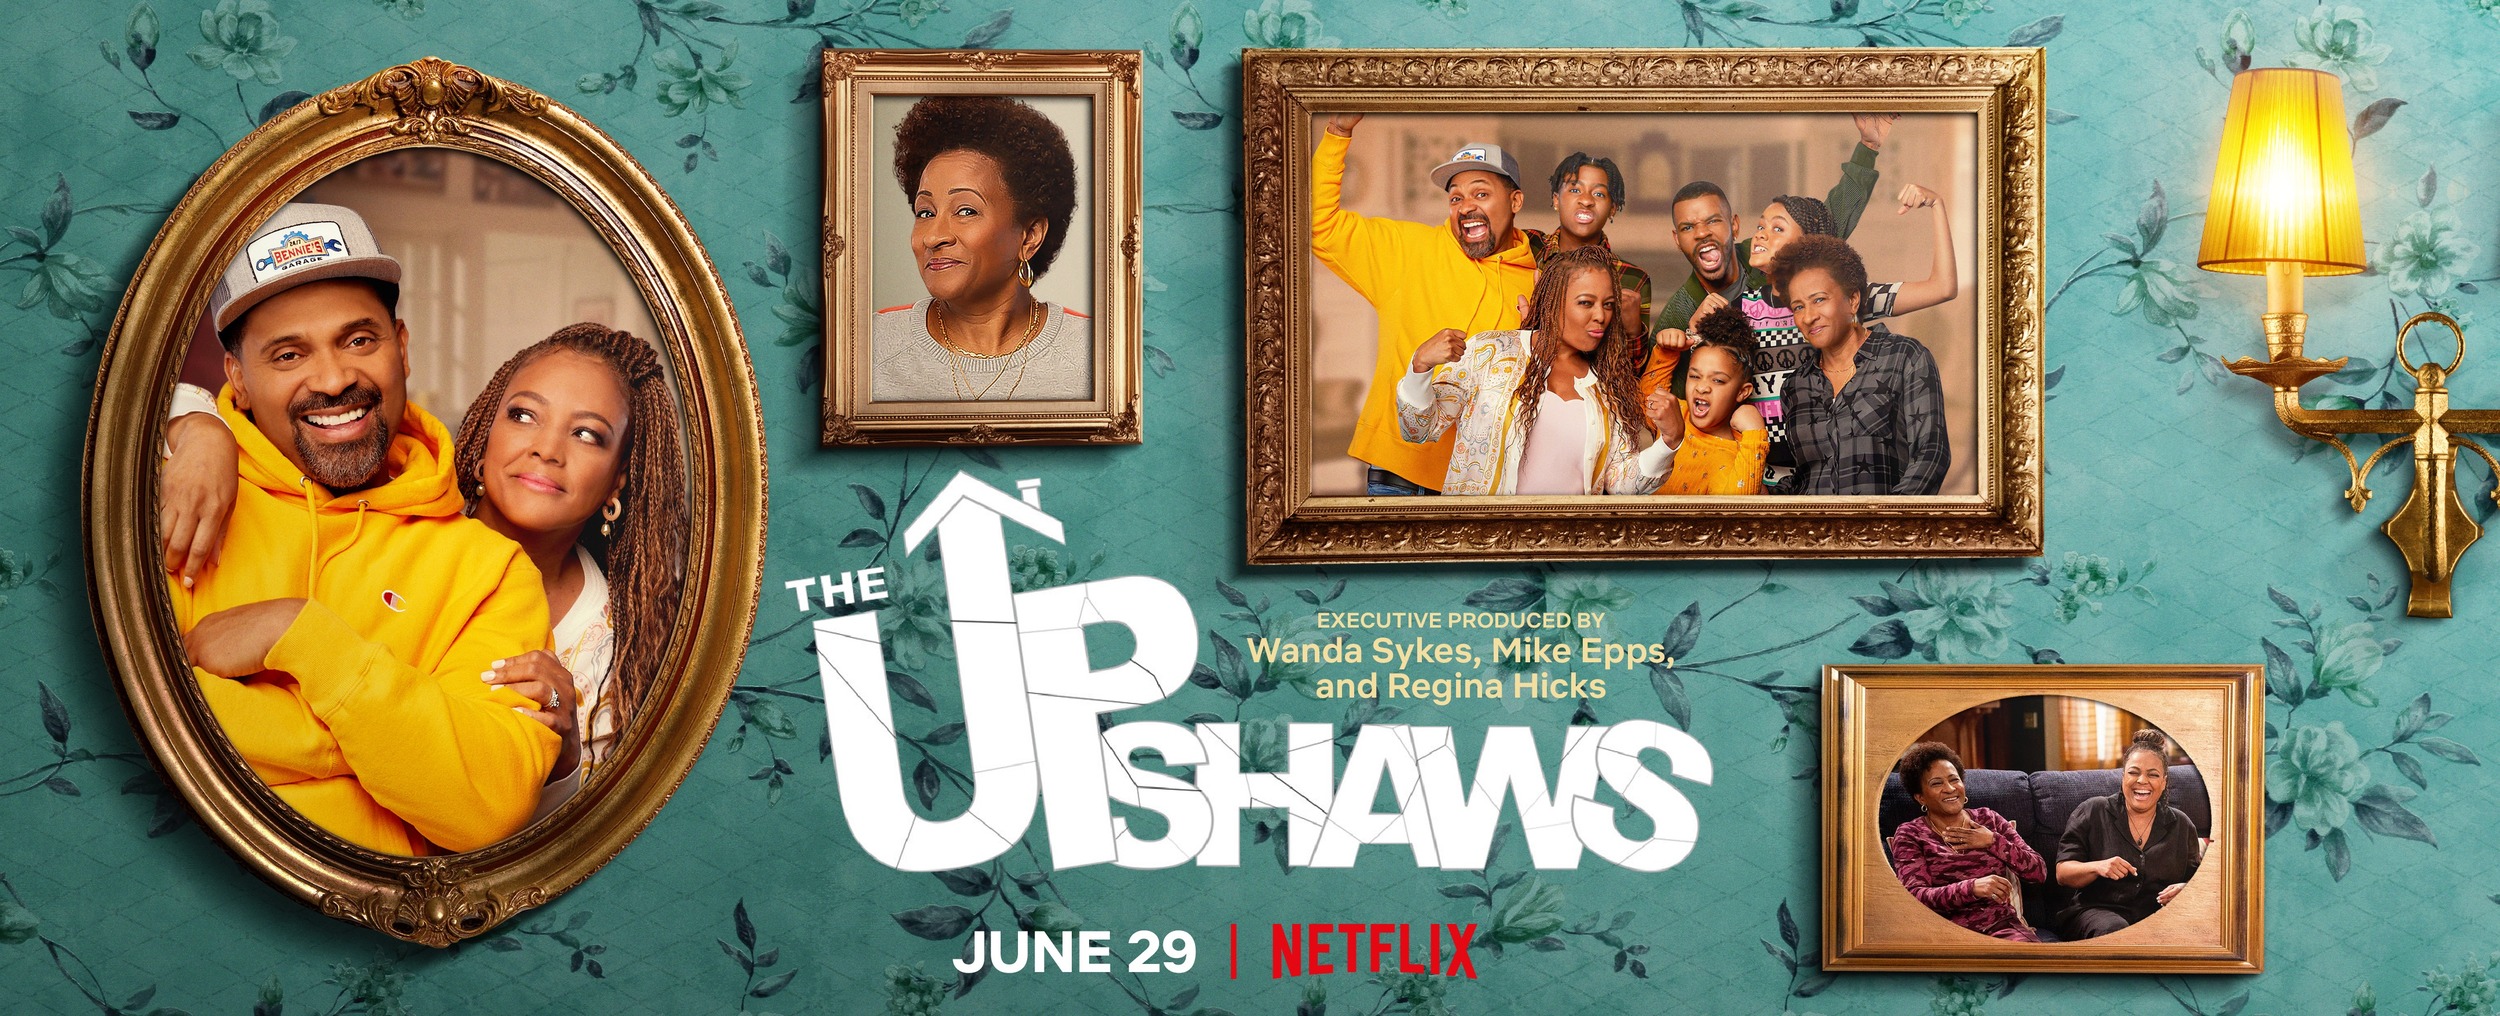 Mega Sized Movie Poster Image for The Upshaws (#5 of 5)